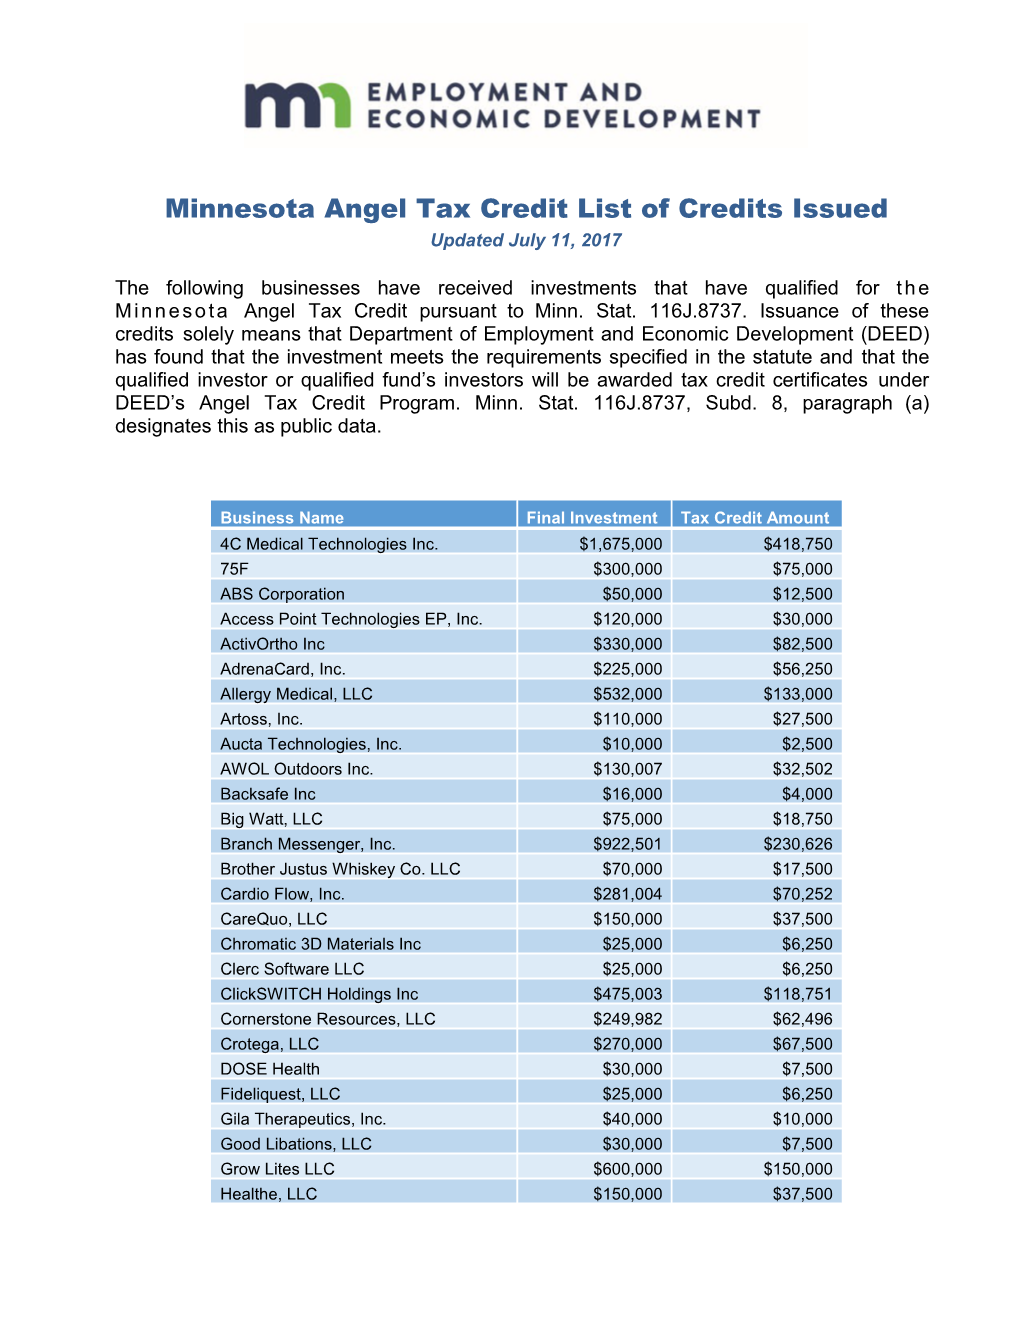 Minnesota Angel Tax Credit List of Credits Issued Updated July 11, 2017 the Following